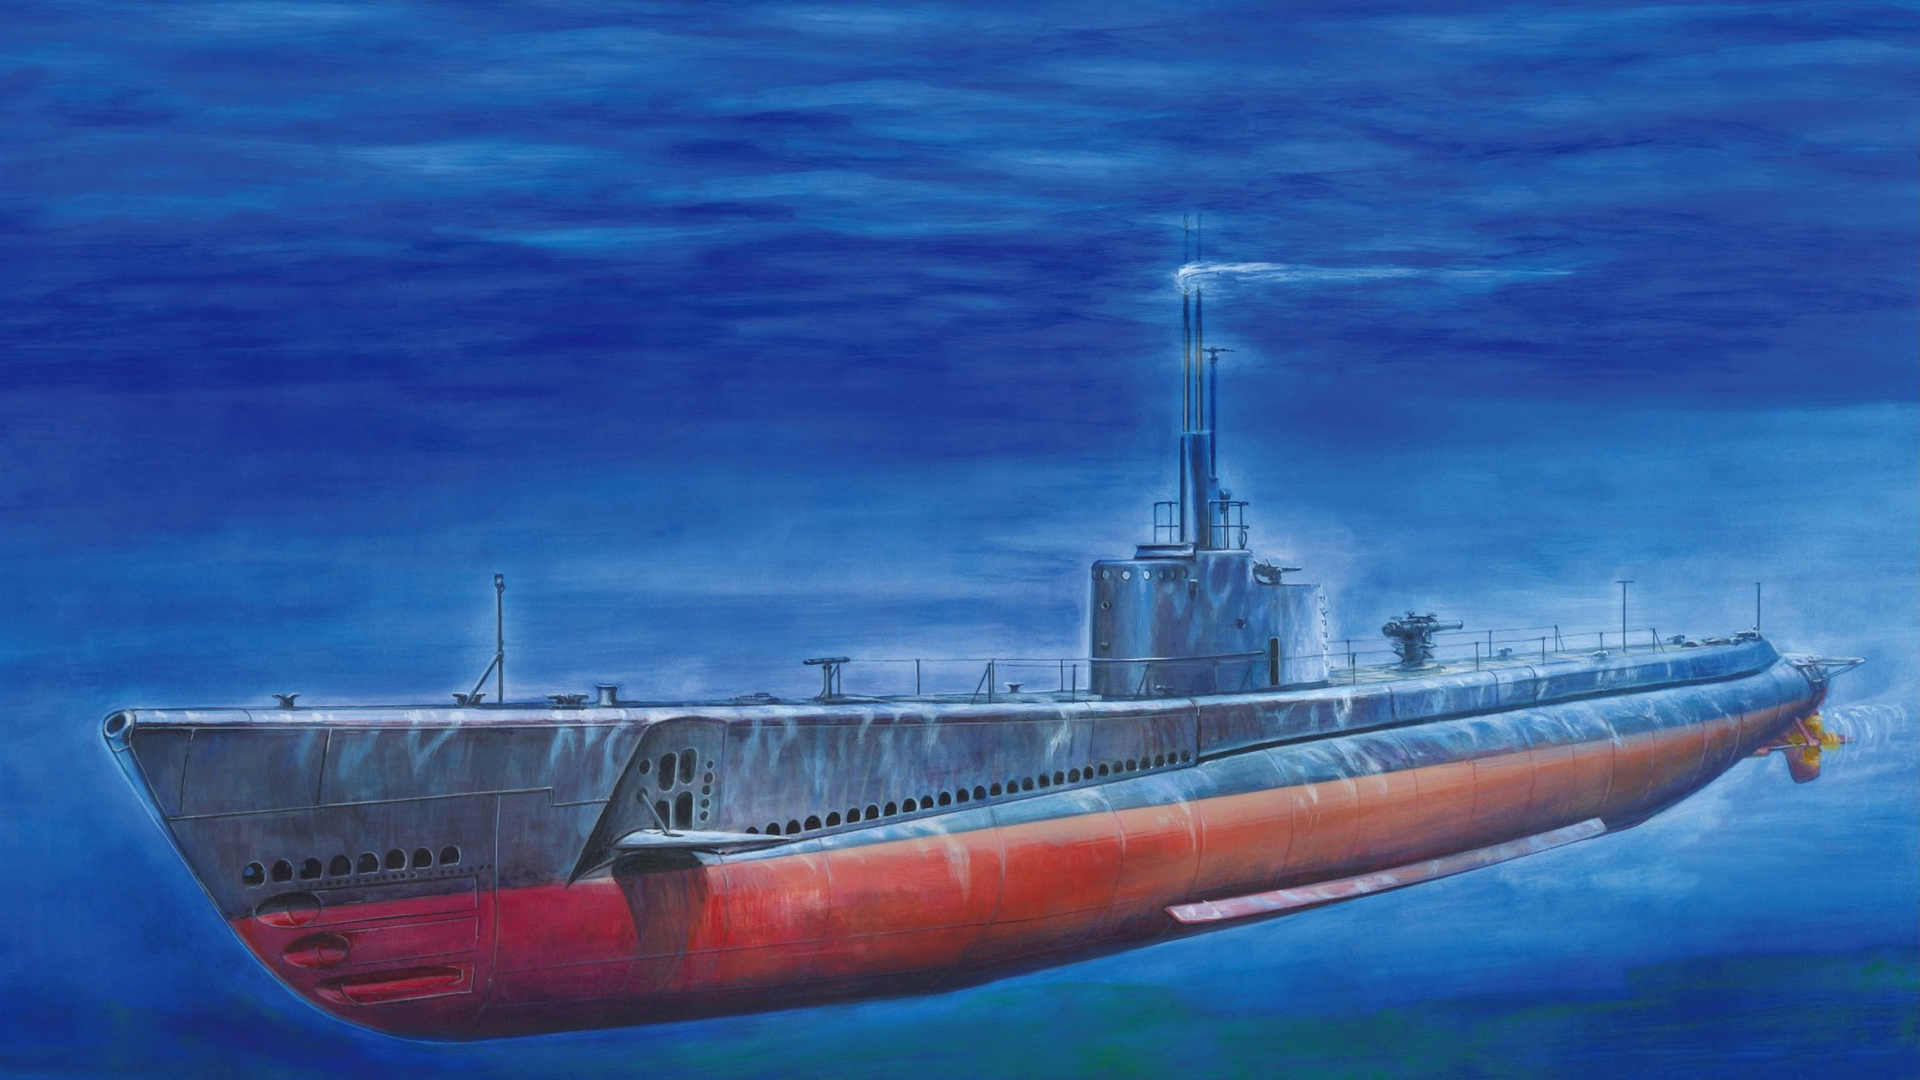 Submarine wallpapers and images   wallpapers pictures photos 1920x1080